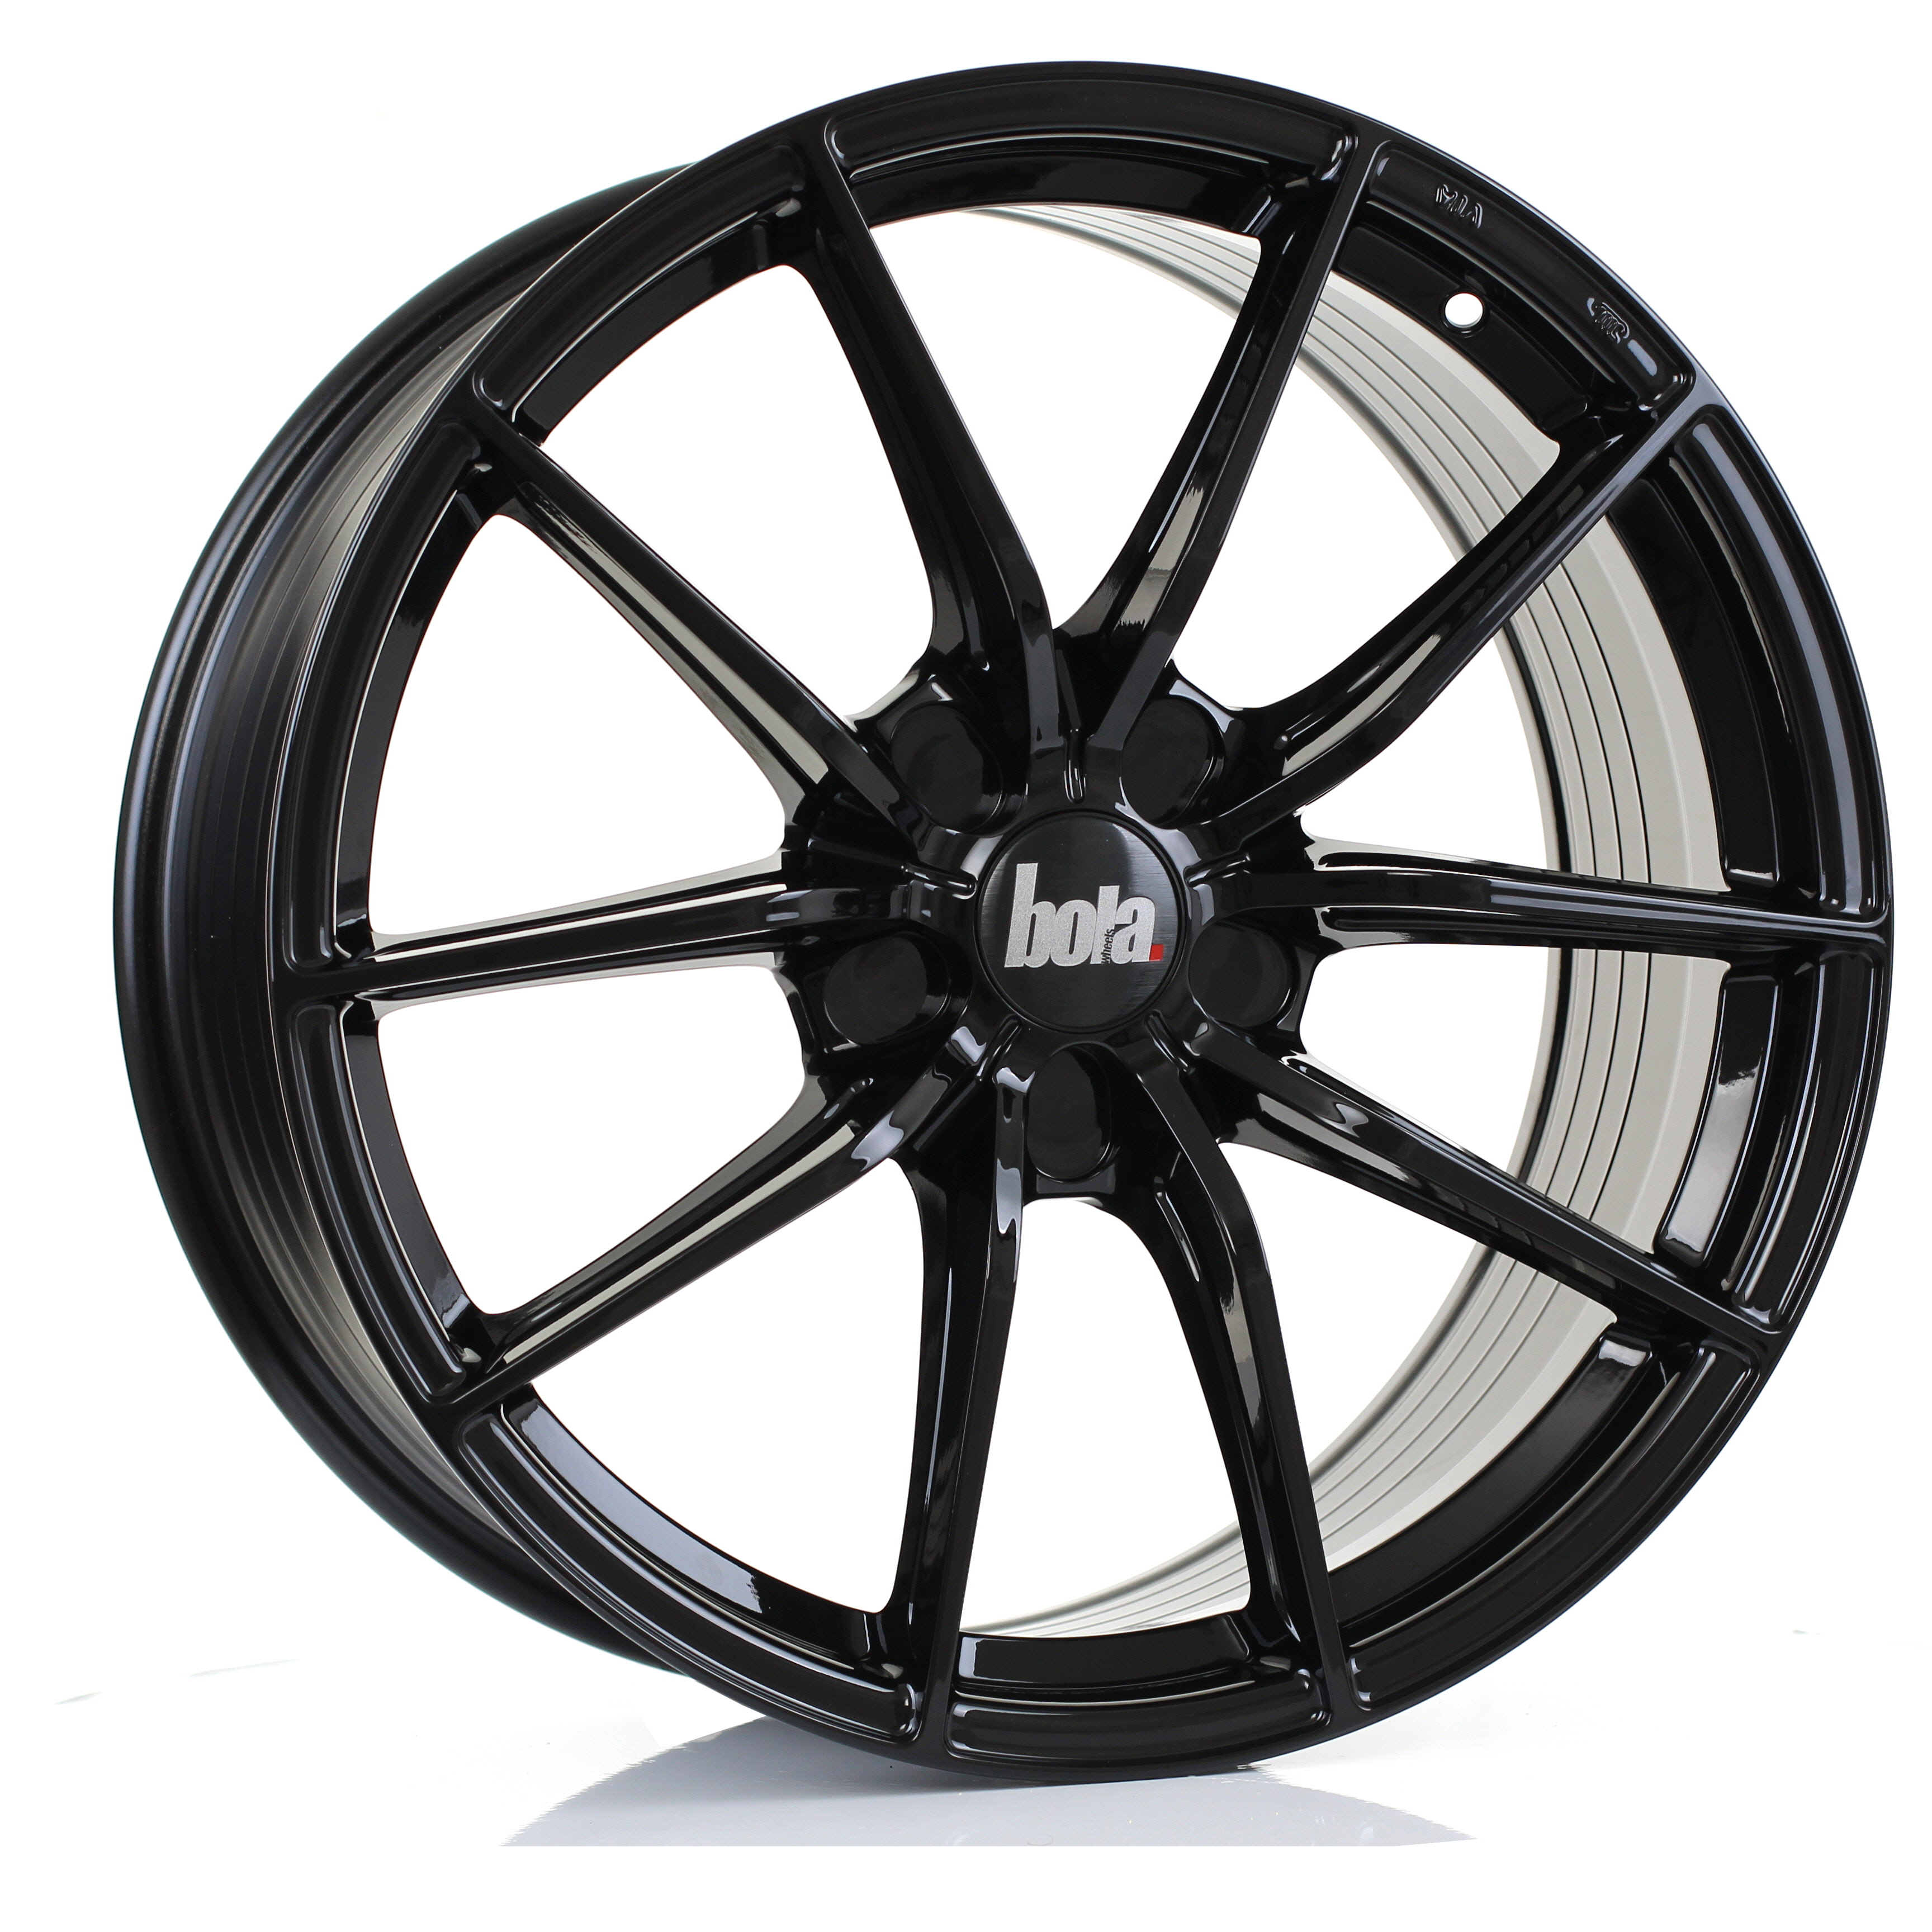 Violate easy to be hurt dig JANTE BOLA FLC GLOSS BALCK 8,5X19 5X112 ET 45 - Speed Wheel